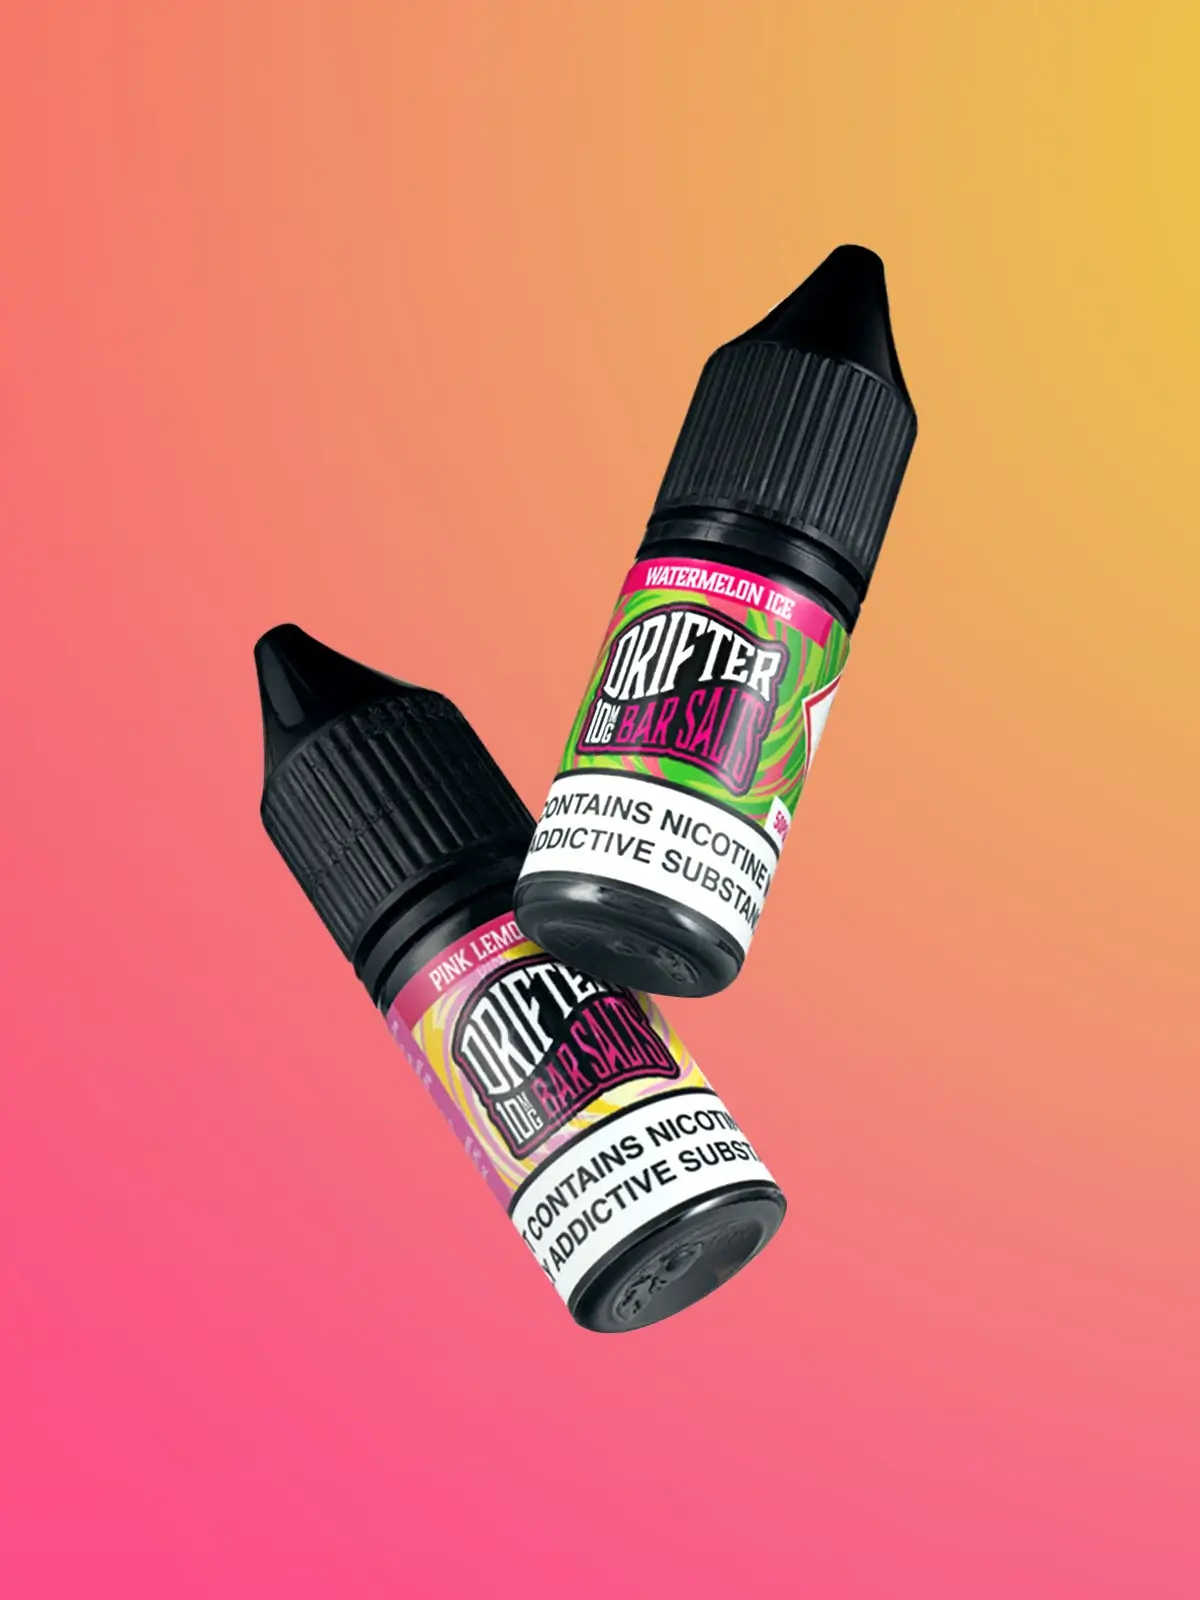 Two bottles of Drifter e-liquid floating in front of a pink and orange background